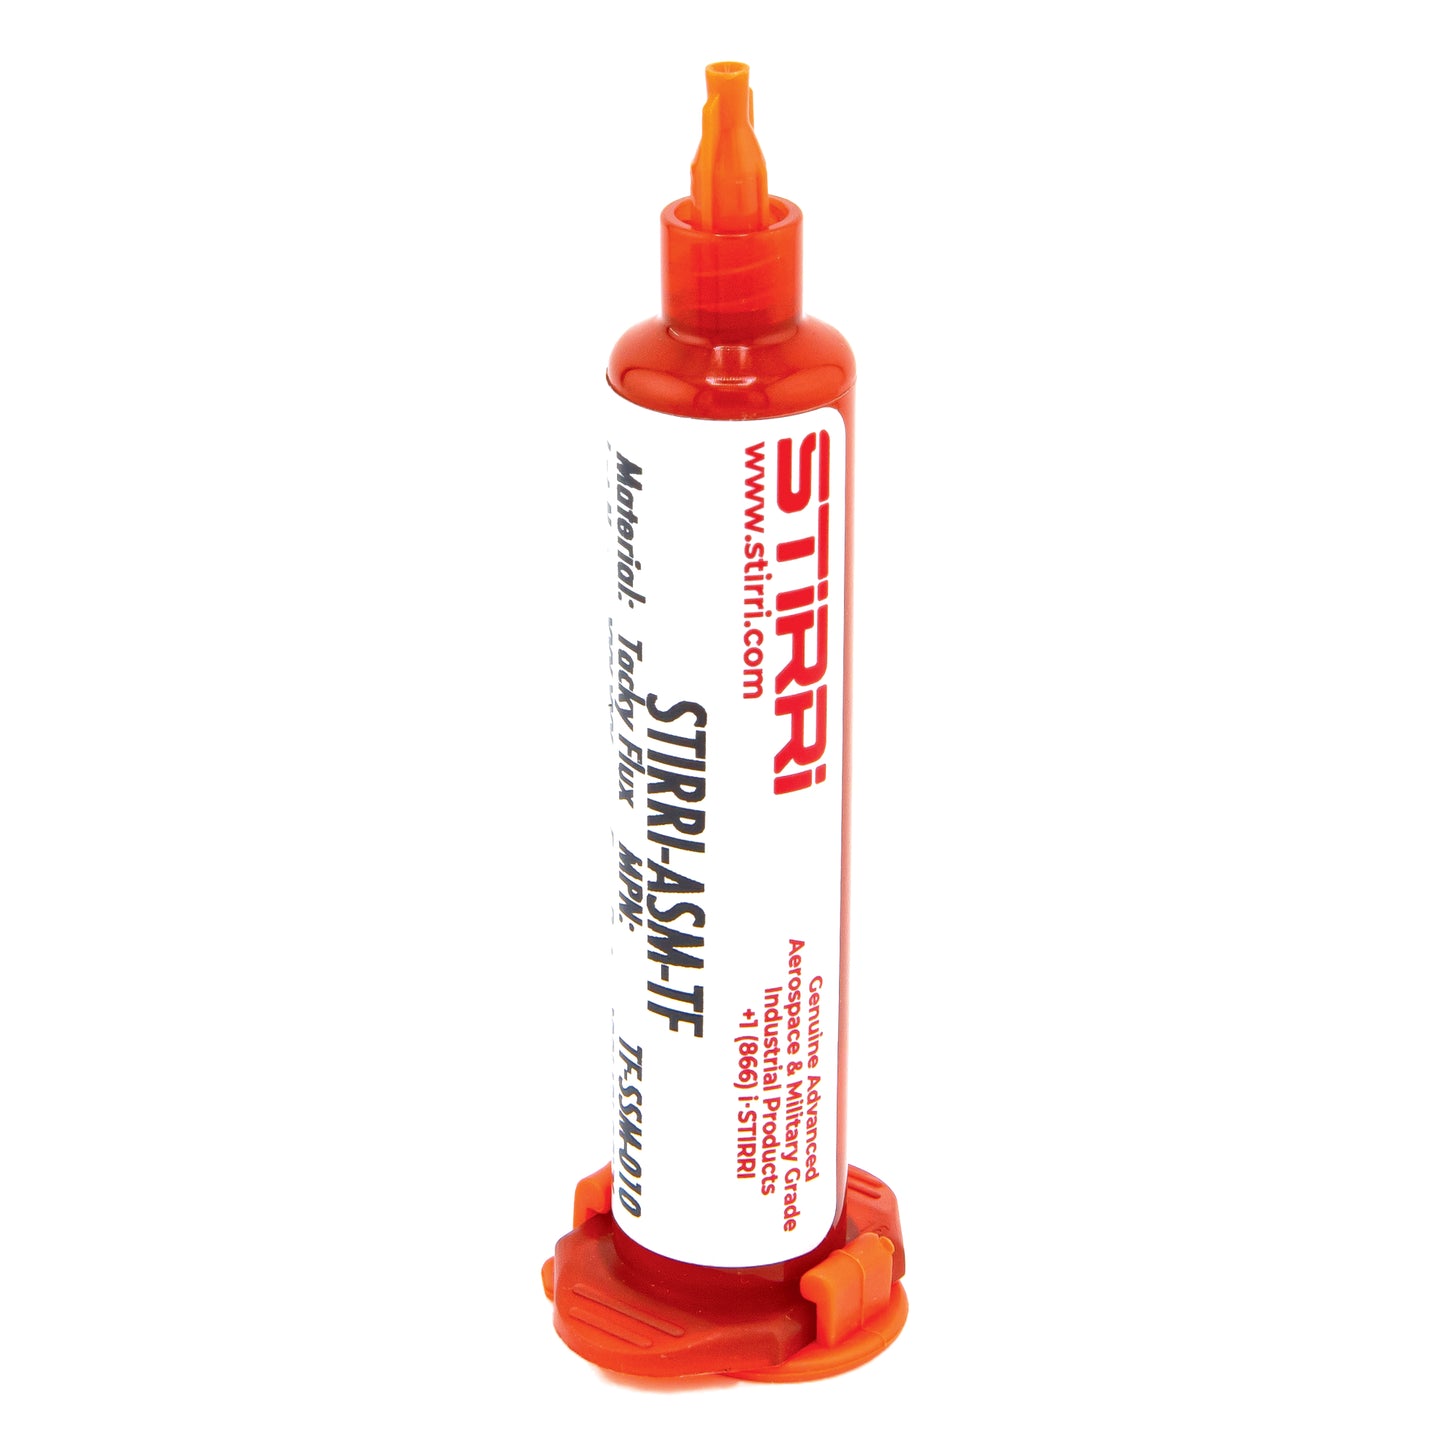 ASM-TF universal no-clean tacky soldering flux for automated assembly (ROL0)